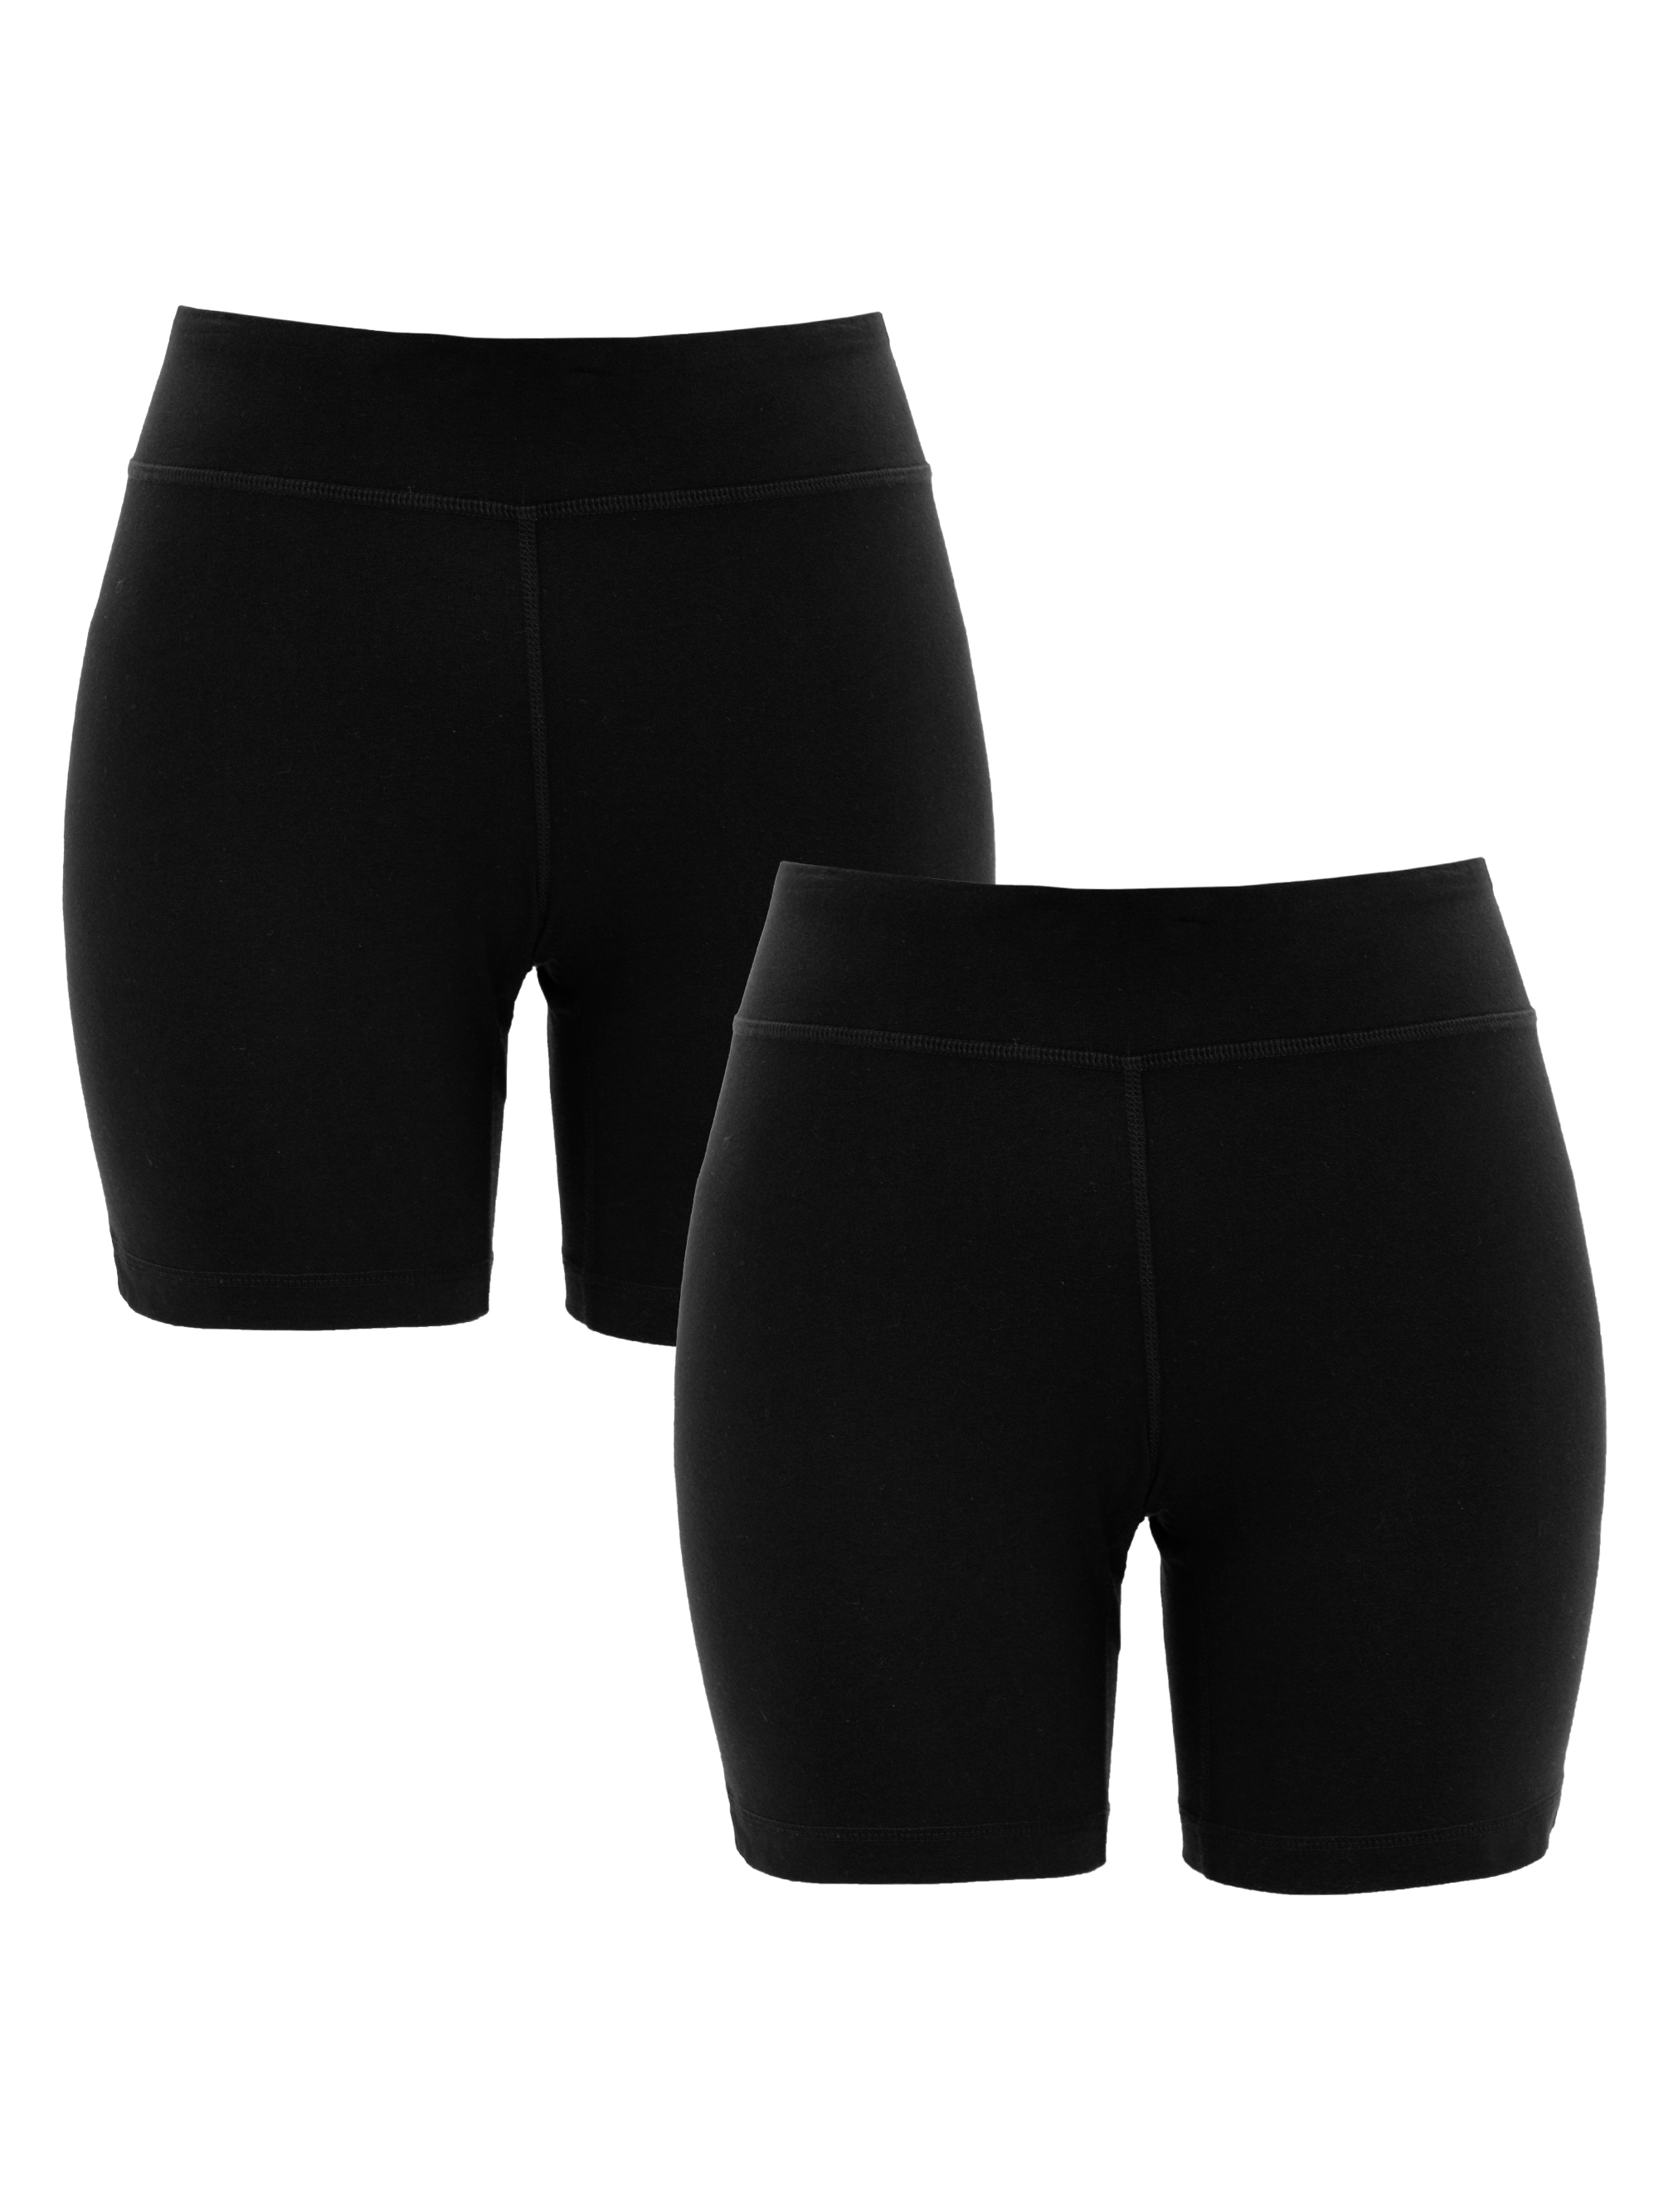 Athletic Works Women's Active Dri-Works Bike Shorts, 2-Pack, Sizes S-XXL - image 1 of 7